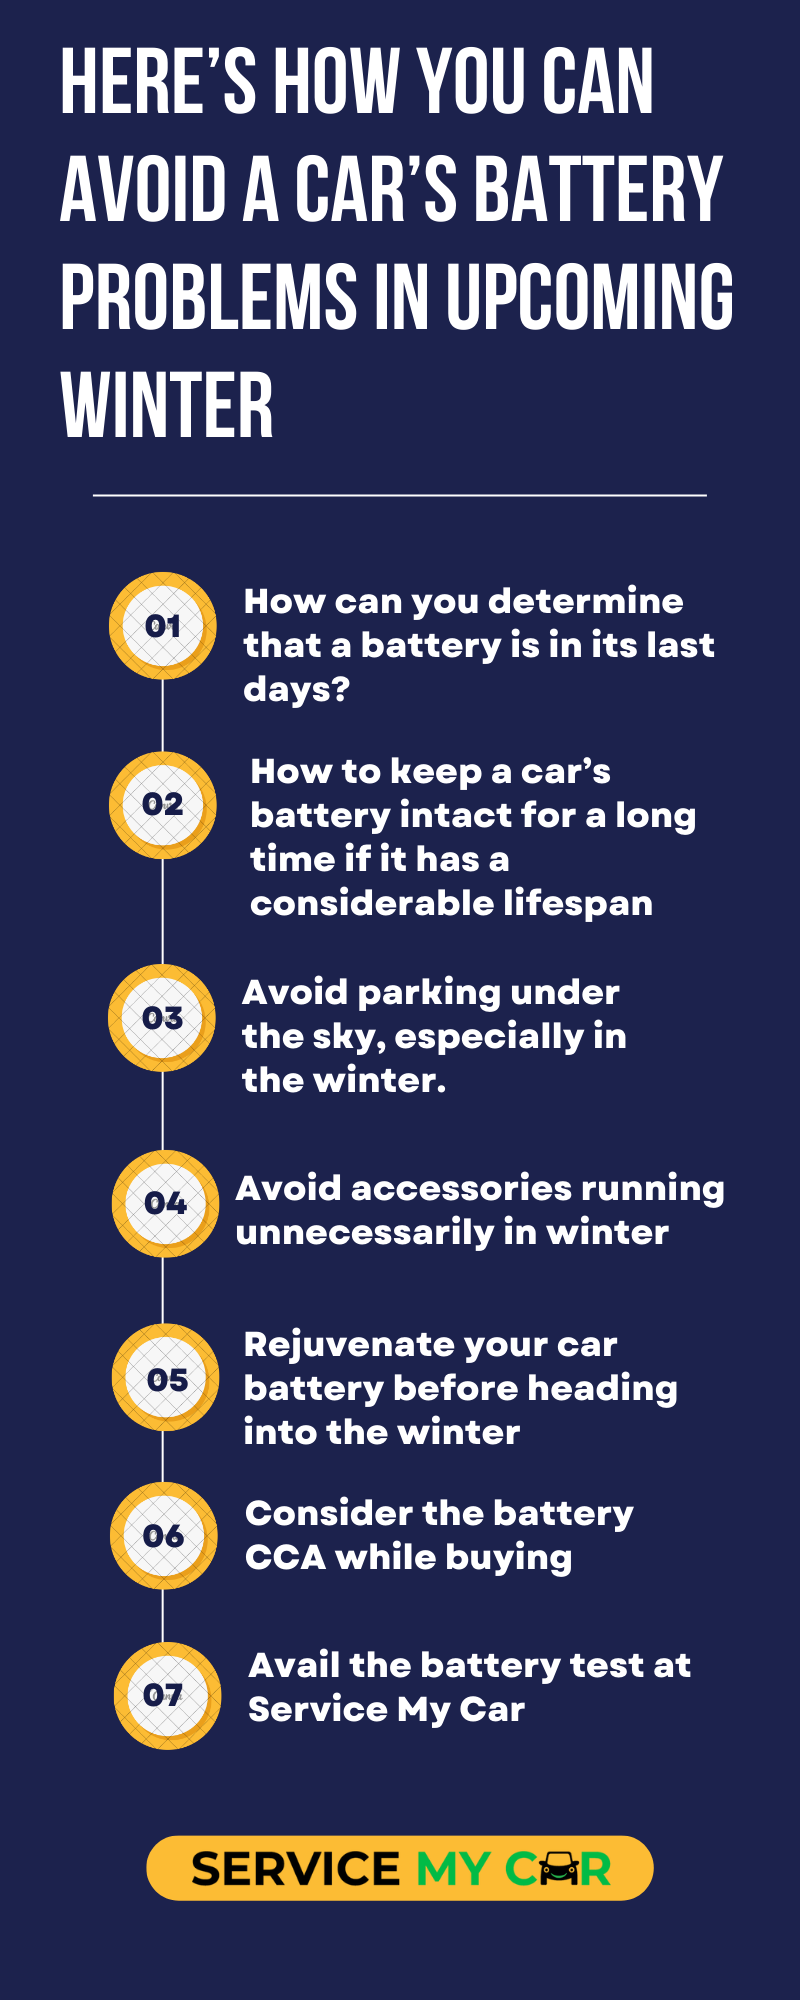 Here’s How you can avoid A Car’s Battery Problems in Winter